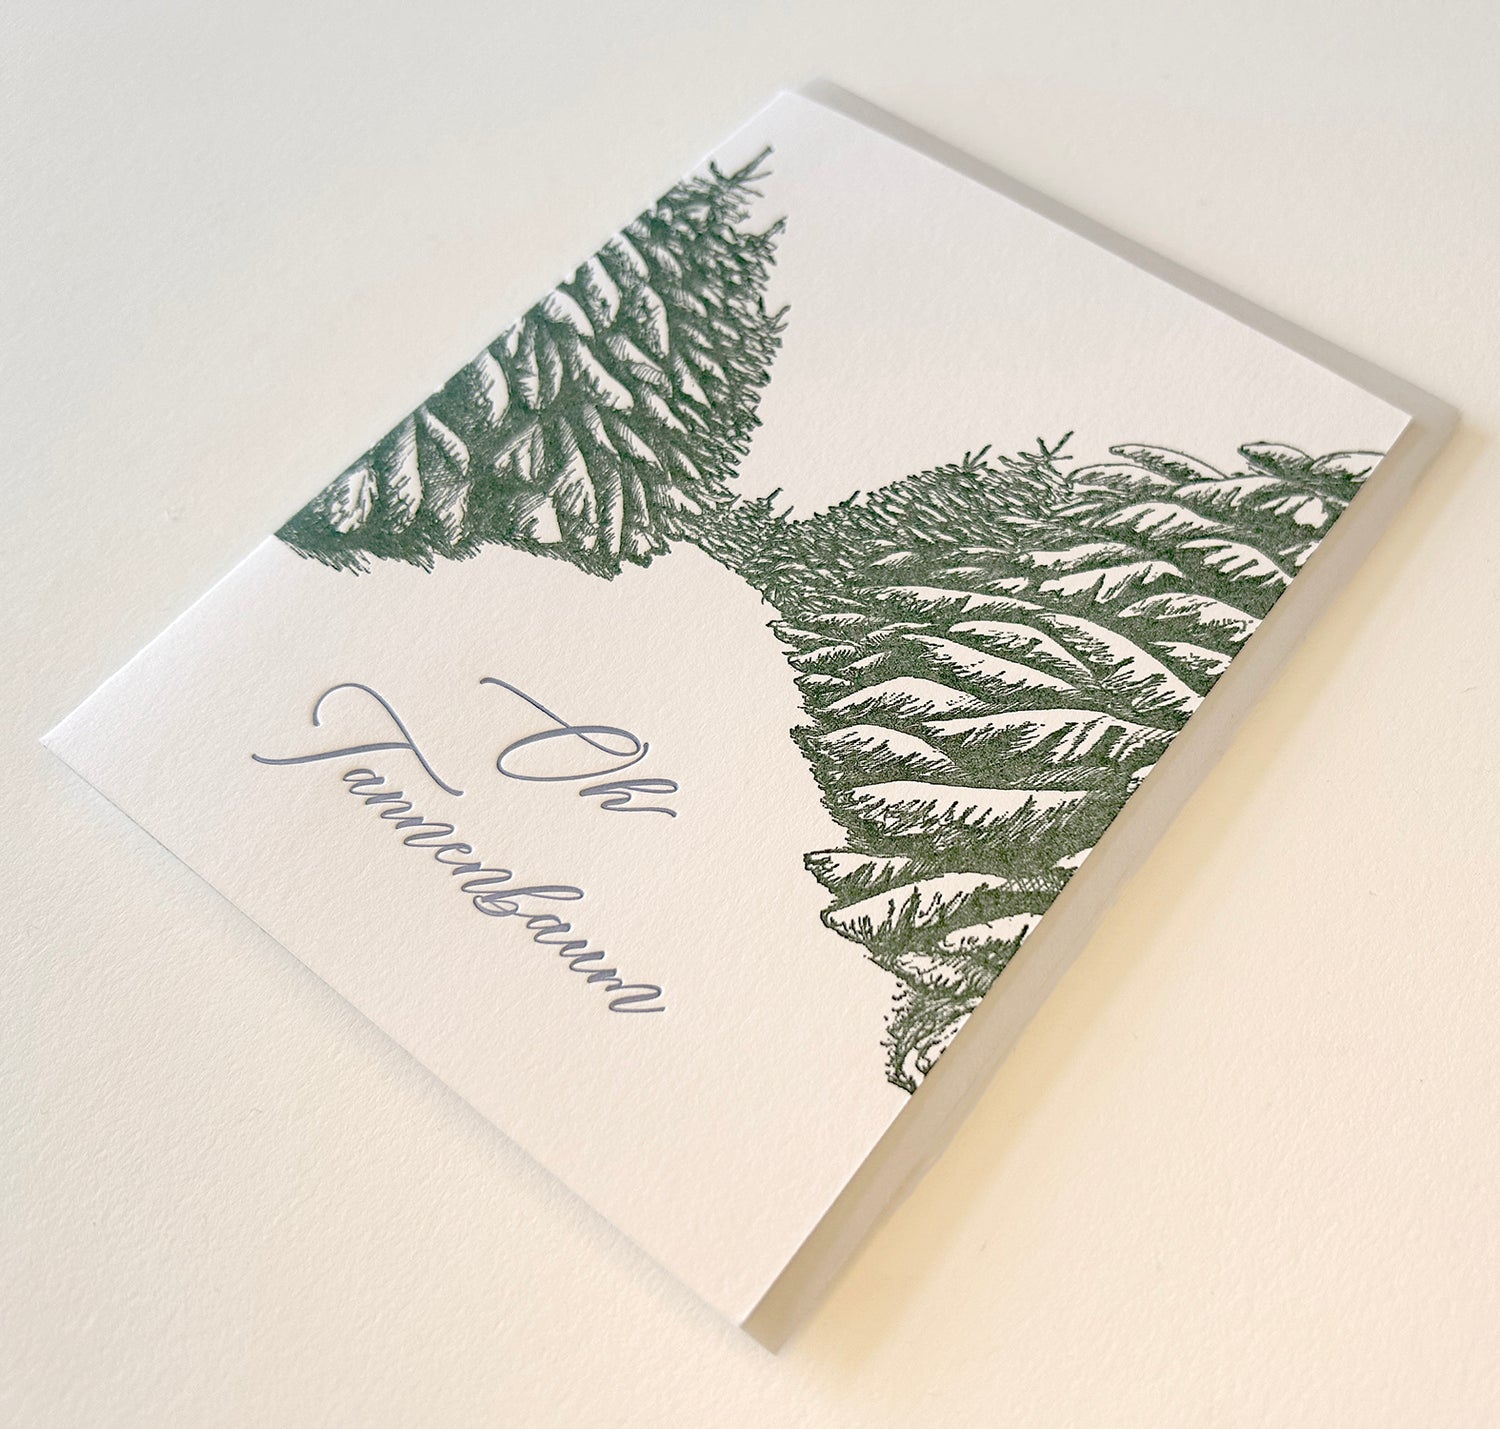 Letterpress holiday card with trees that says "Oh tannenbaum" by Rust Belt Love